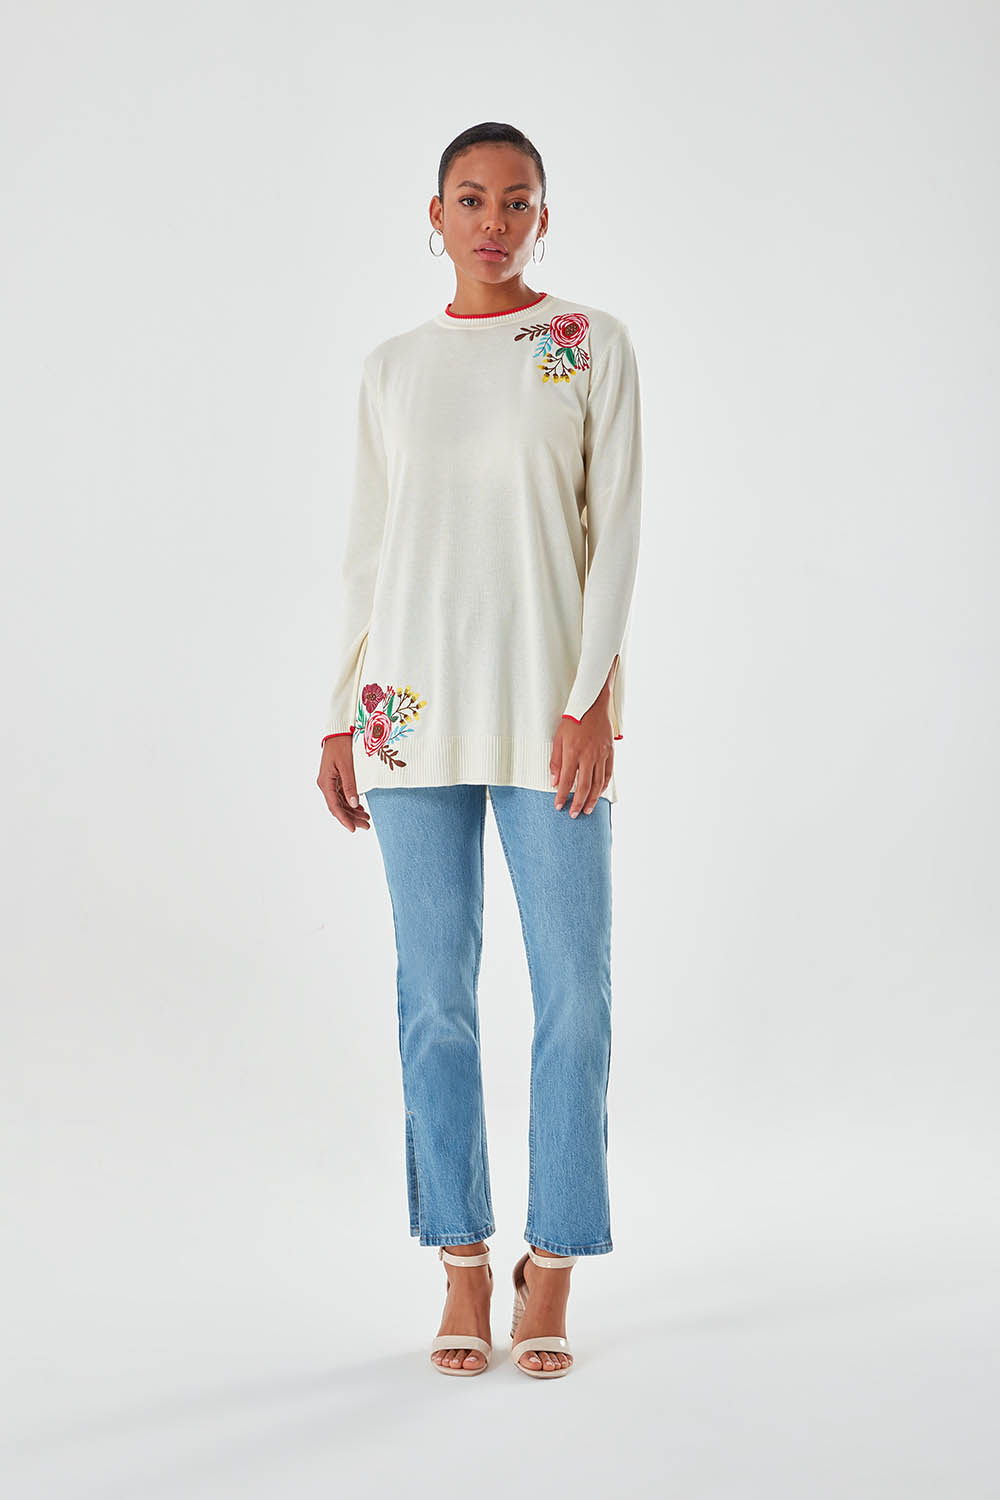 Floral Embroidered Knitwear Ecru Tunic